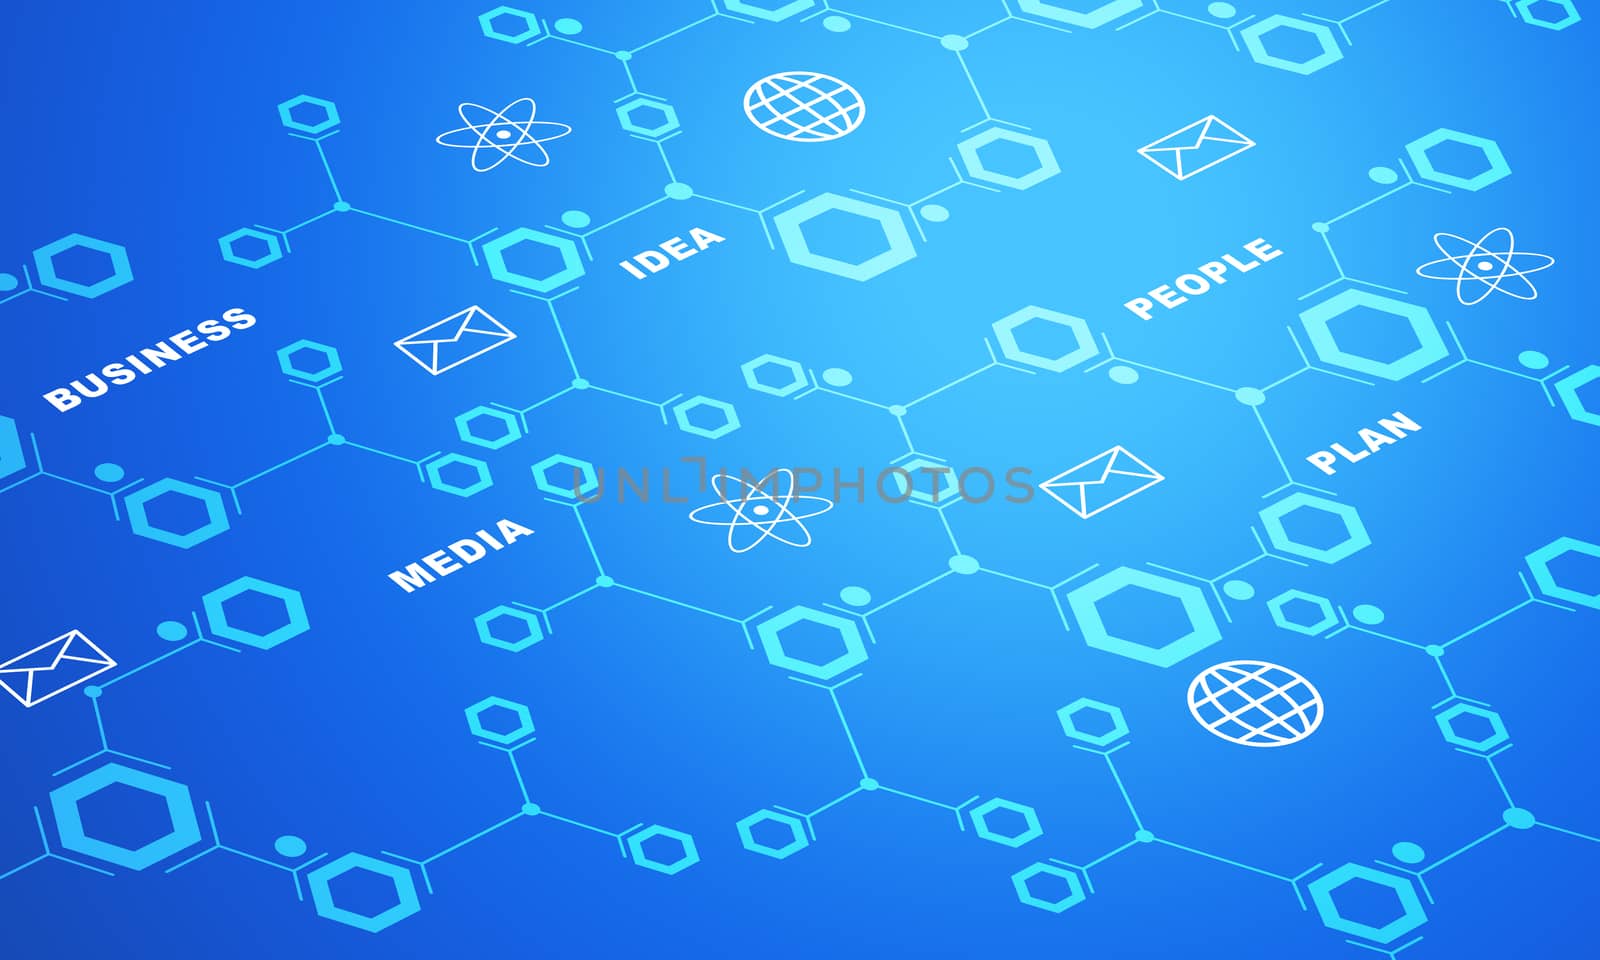 Business words with icons on abstract blue background